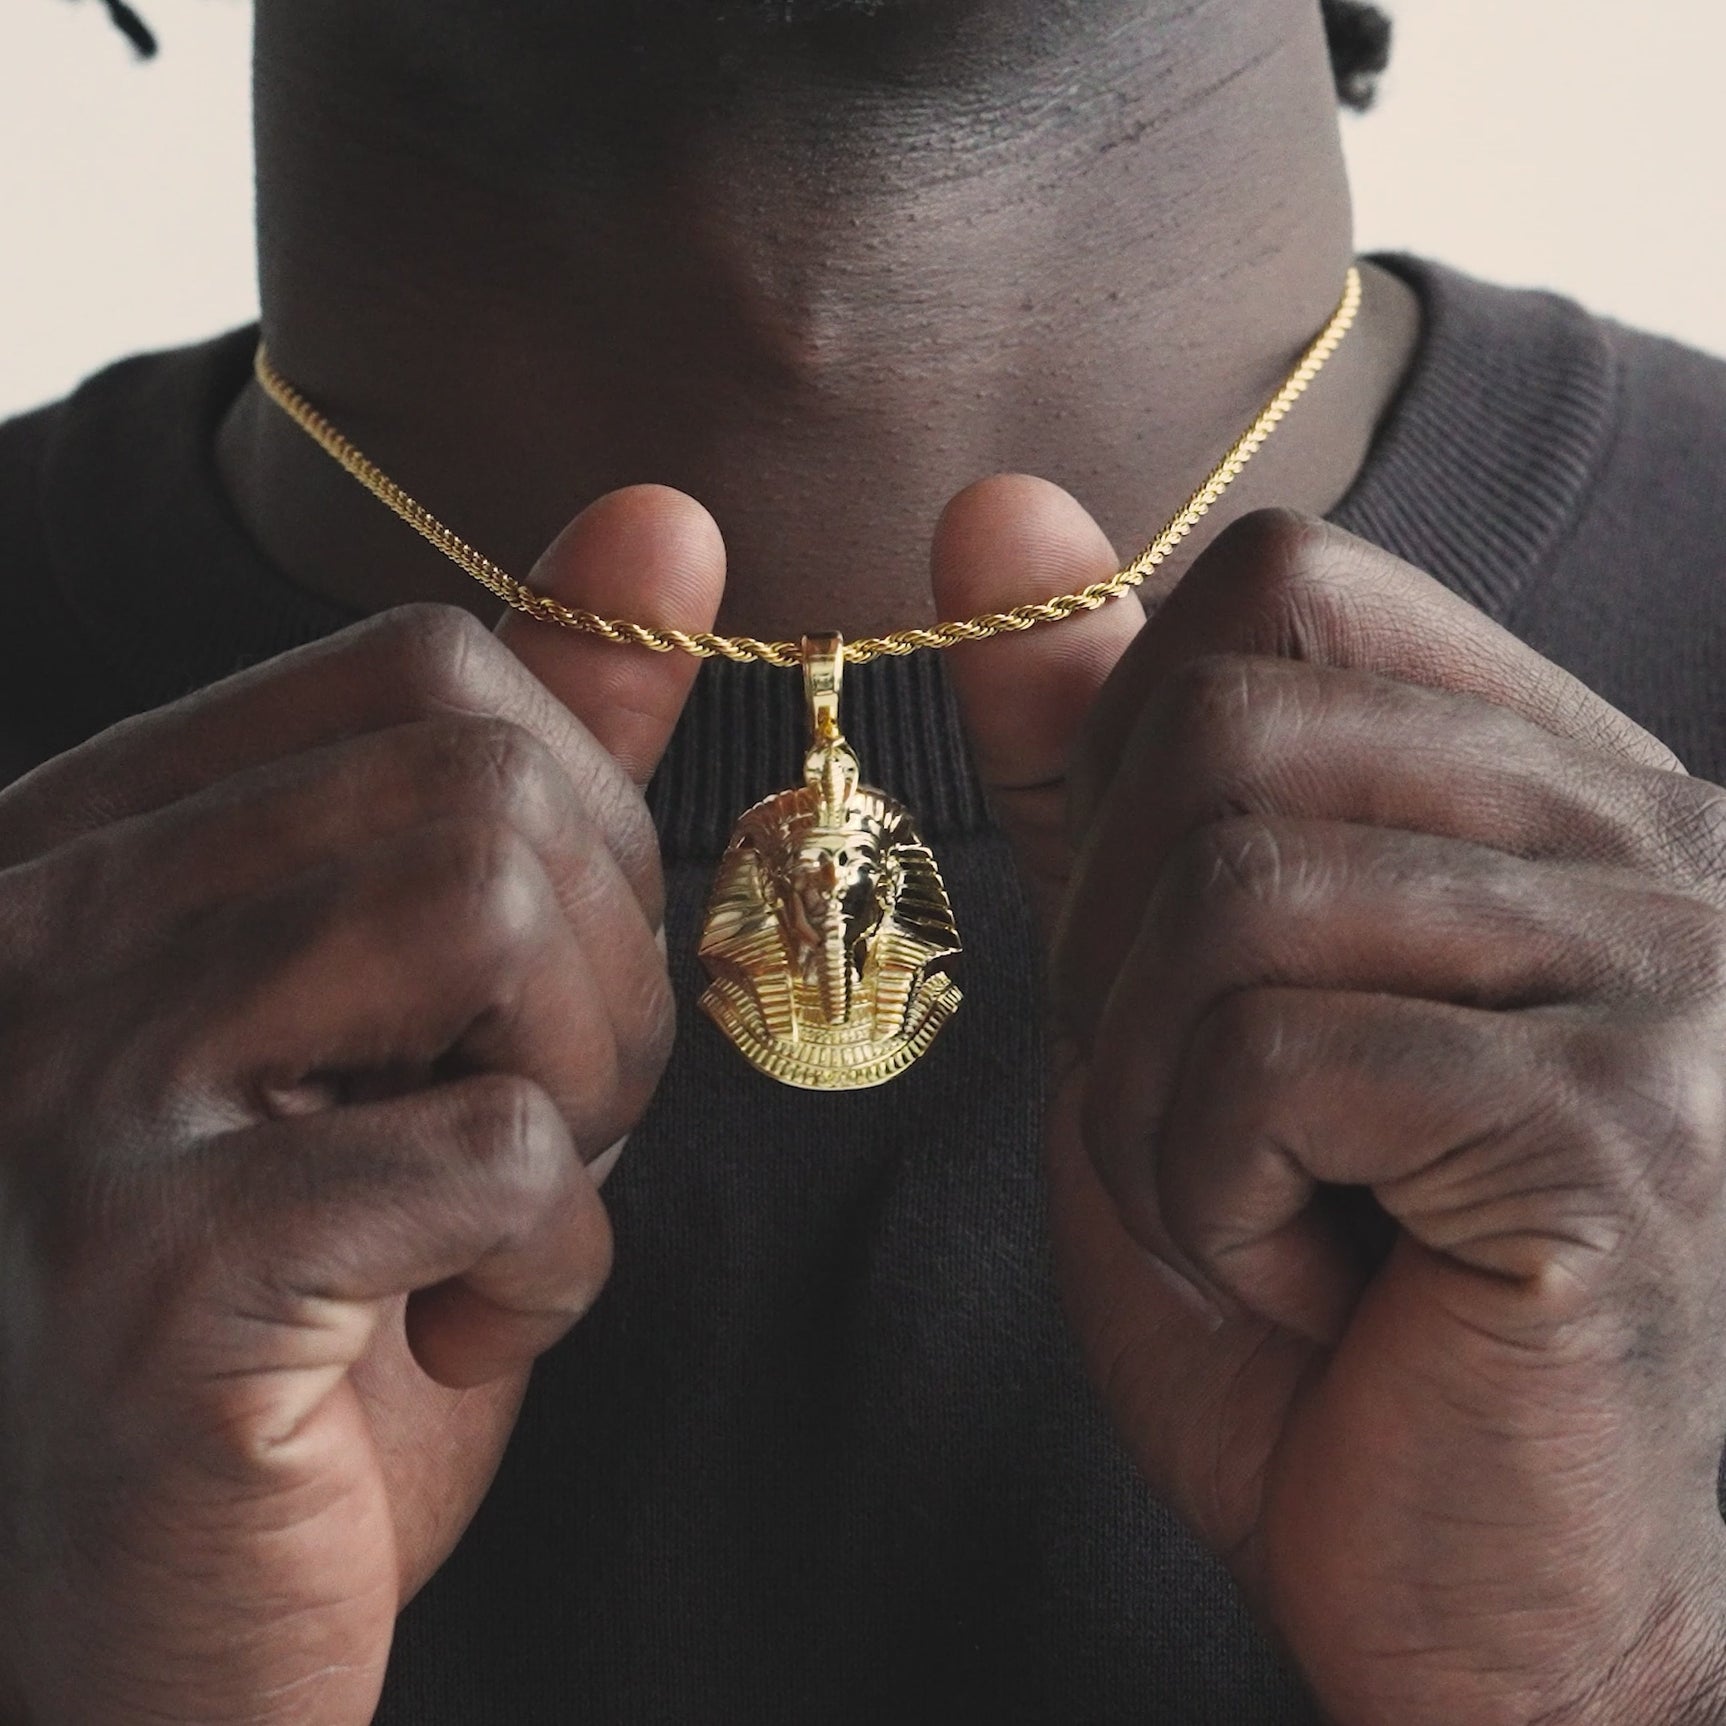 Pharaoh Head V2 Necklace Pendant & Rope Chain The Gold Gods Men's Jewelry Video